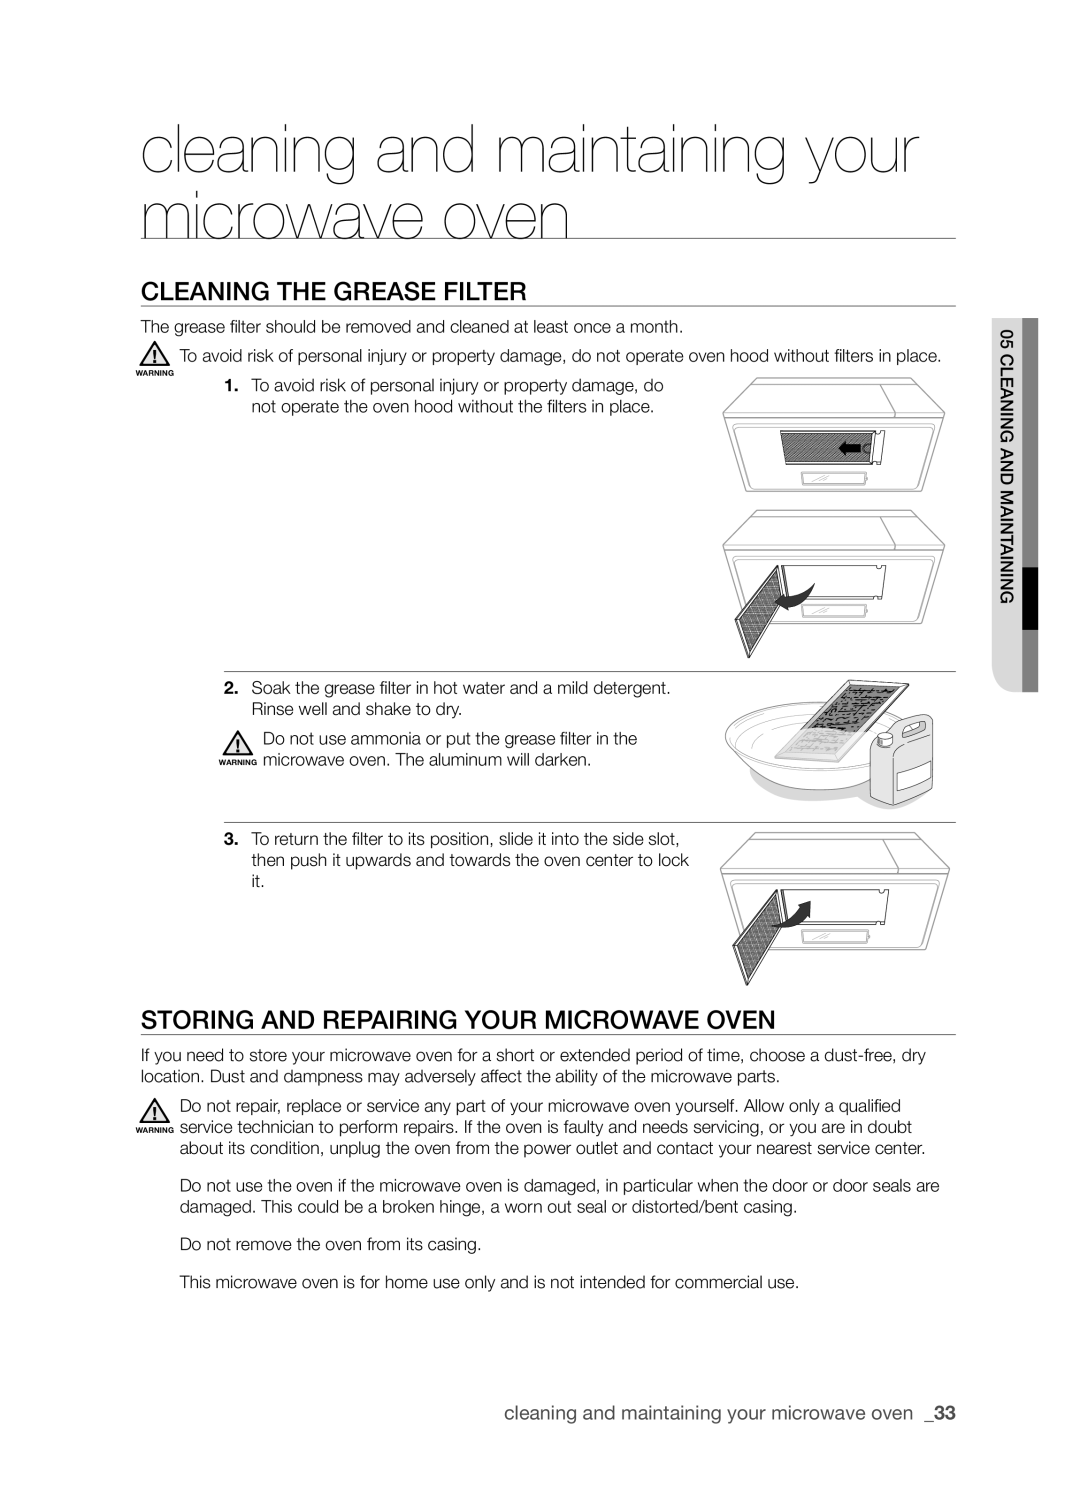 Samsung SMH9151B user manual Cleaning the grease filter, Storing and repairing your microwave oven 